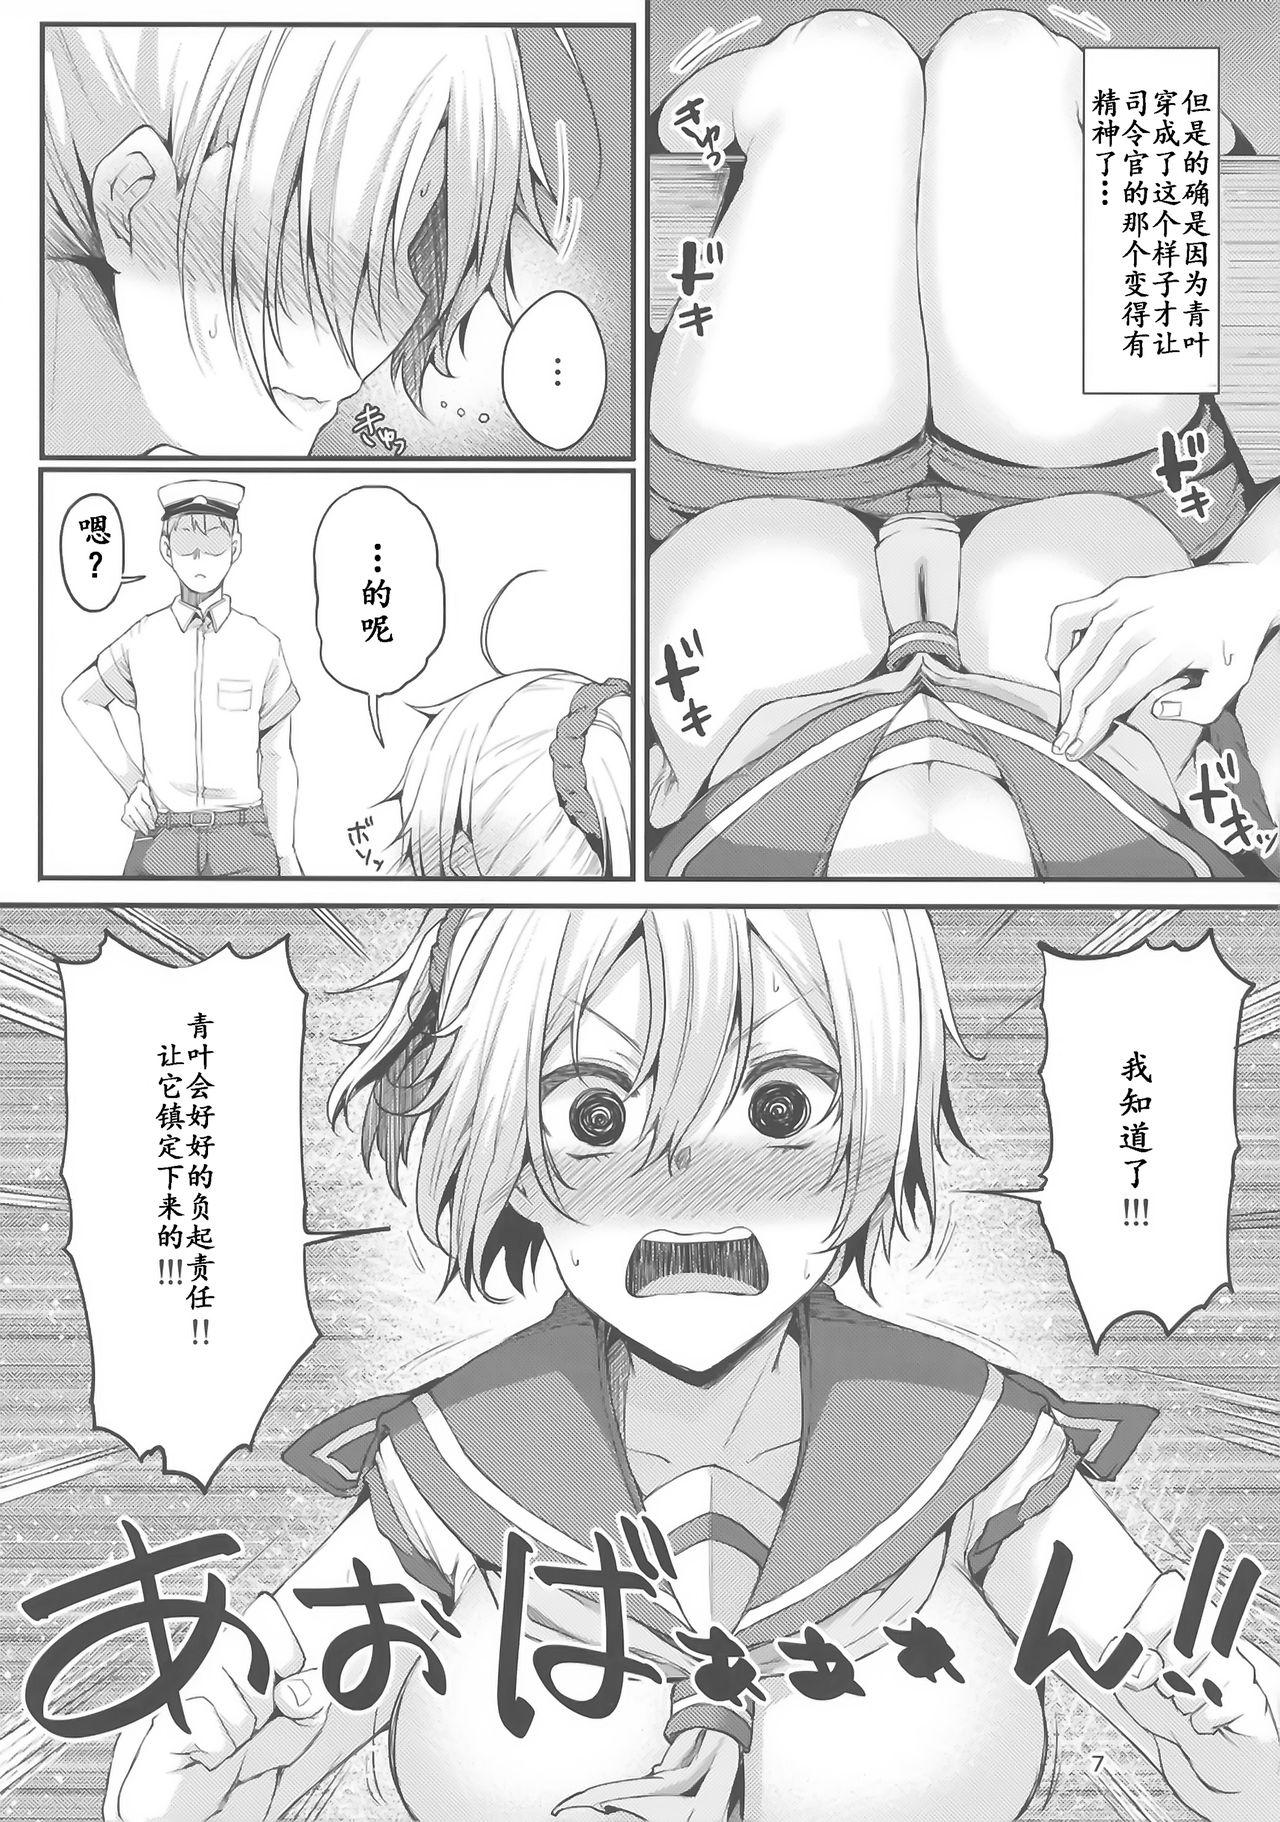 Indonesian Motto x2 Aobax! - Kantai collection Amatuer - Page 8